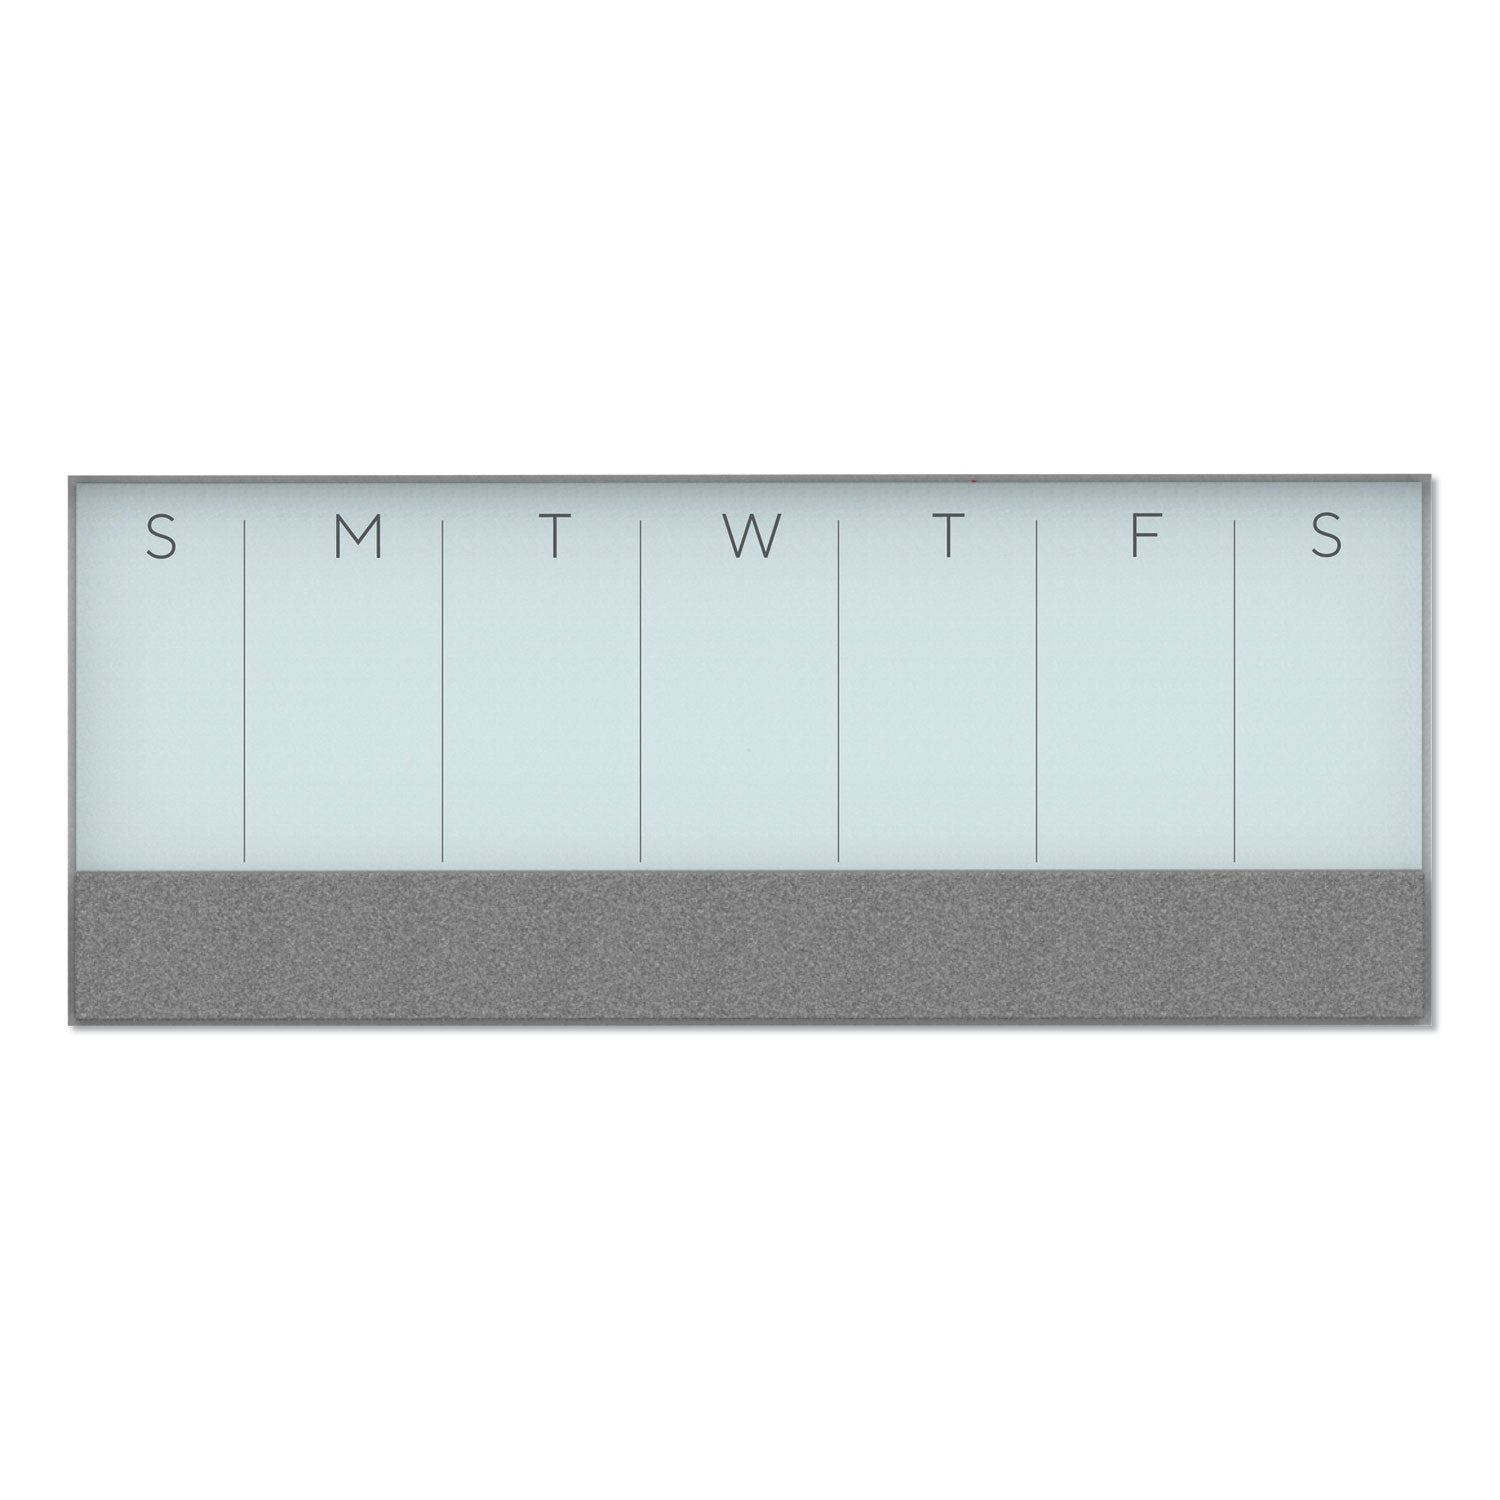 3n1-magnetic-glass-dry-erase-combo-board-weekly-calendar-36-x-1525-gray-white-surface-white-aluminum-frame_ubr3199u0001 - 1